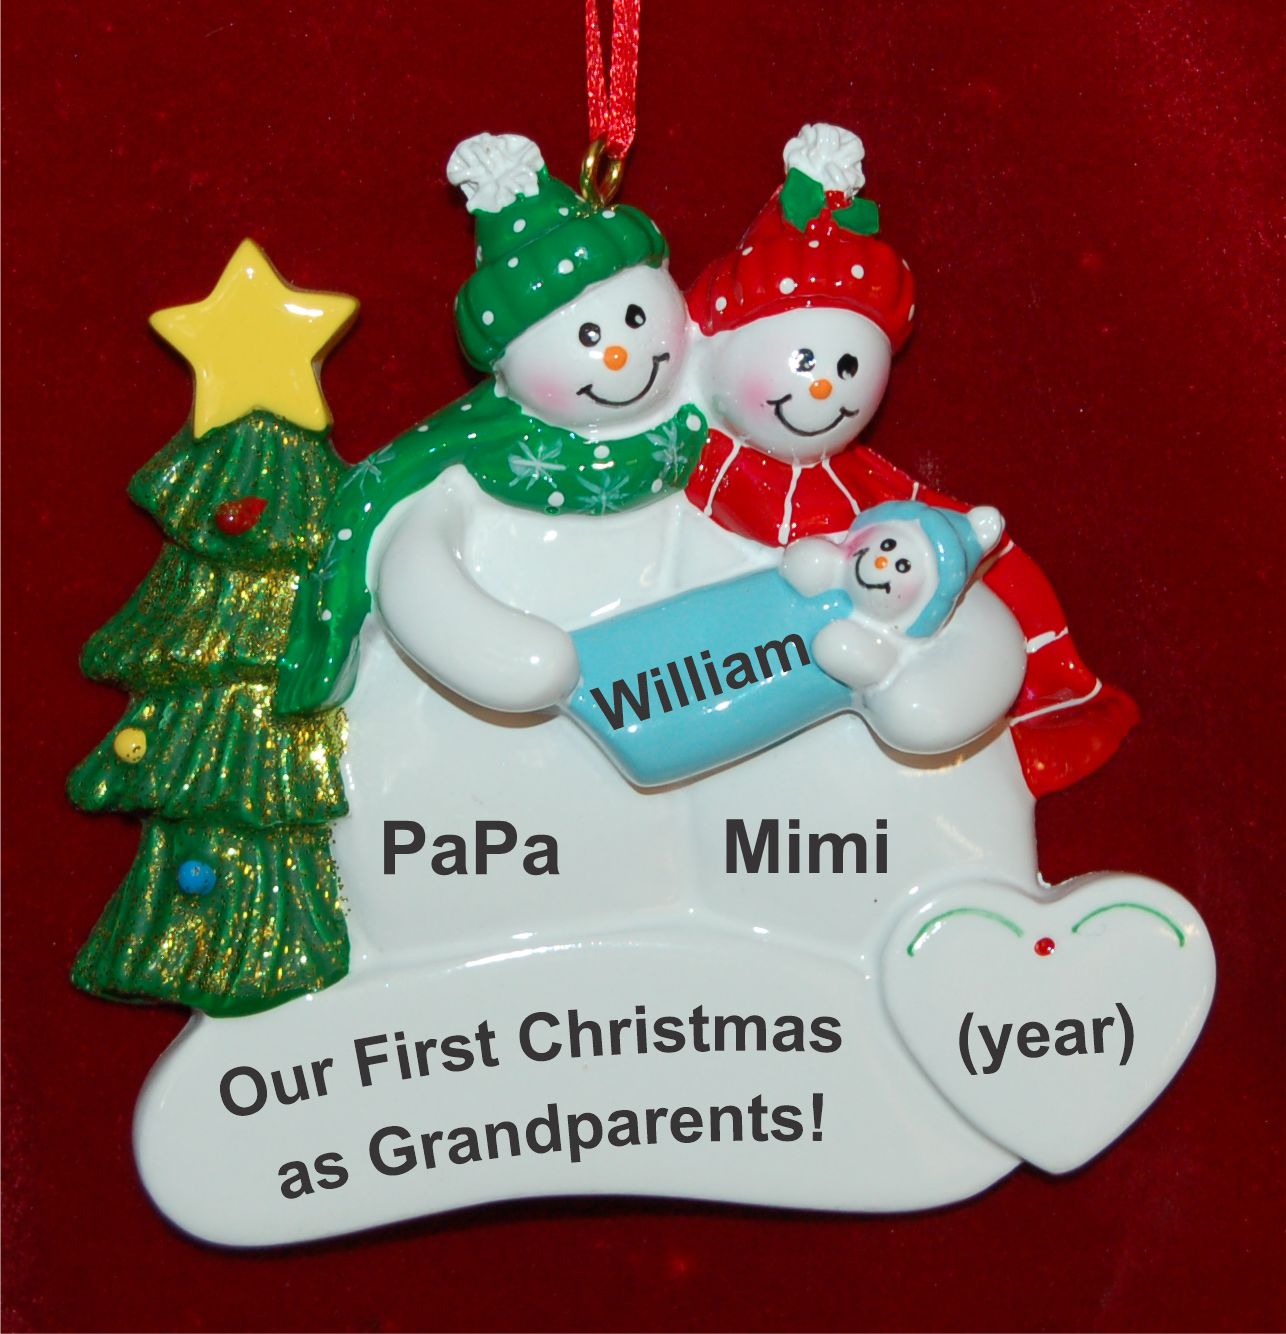 Our First Christmas as Grandparents with Baby Boy Christmas Ornament Personalized by Russell Rhodes